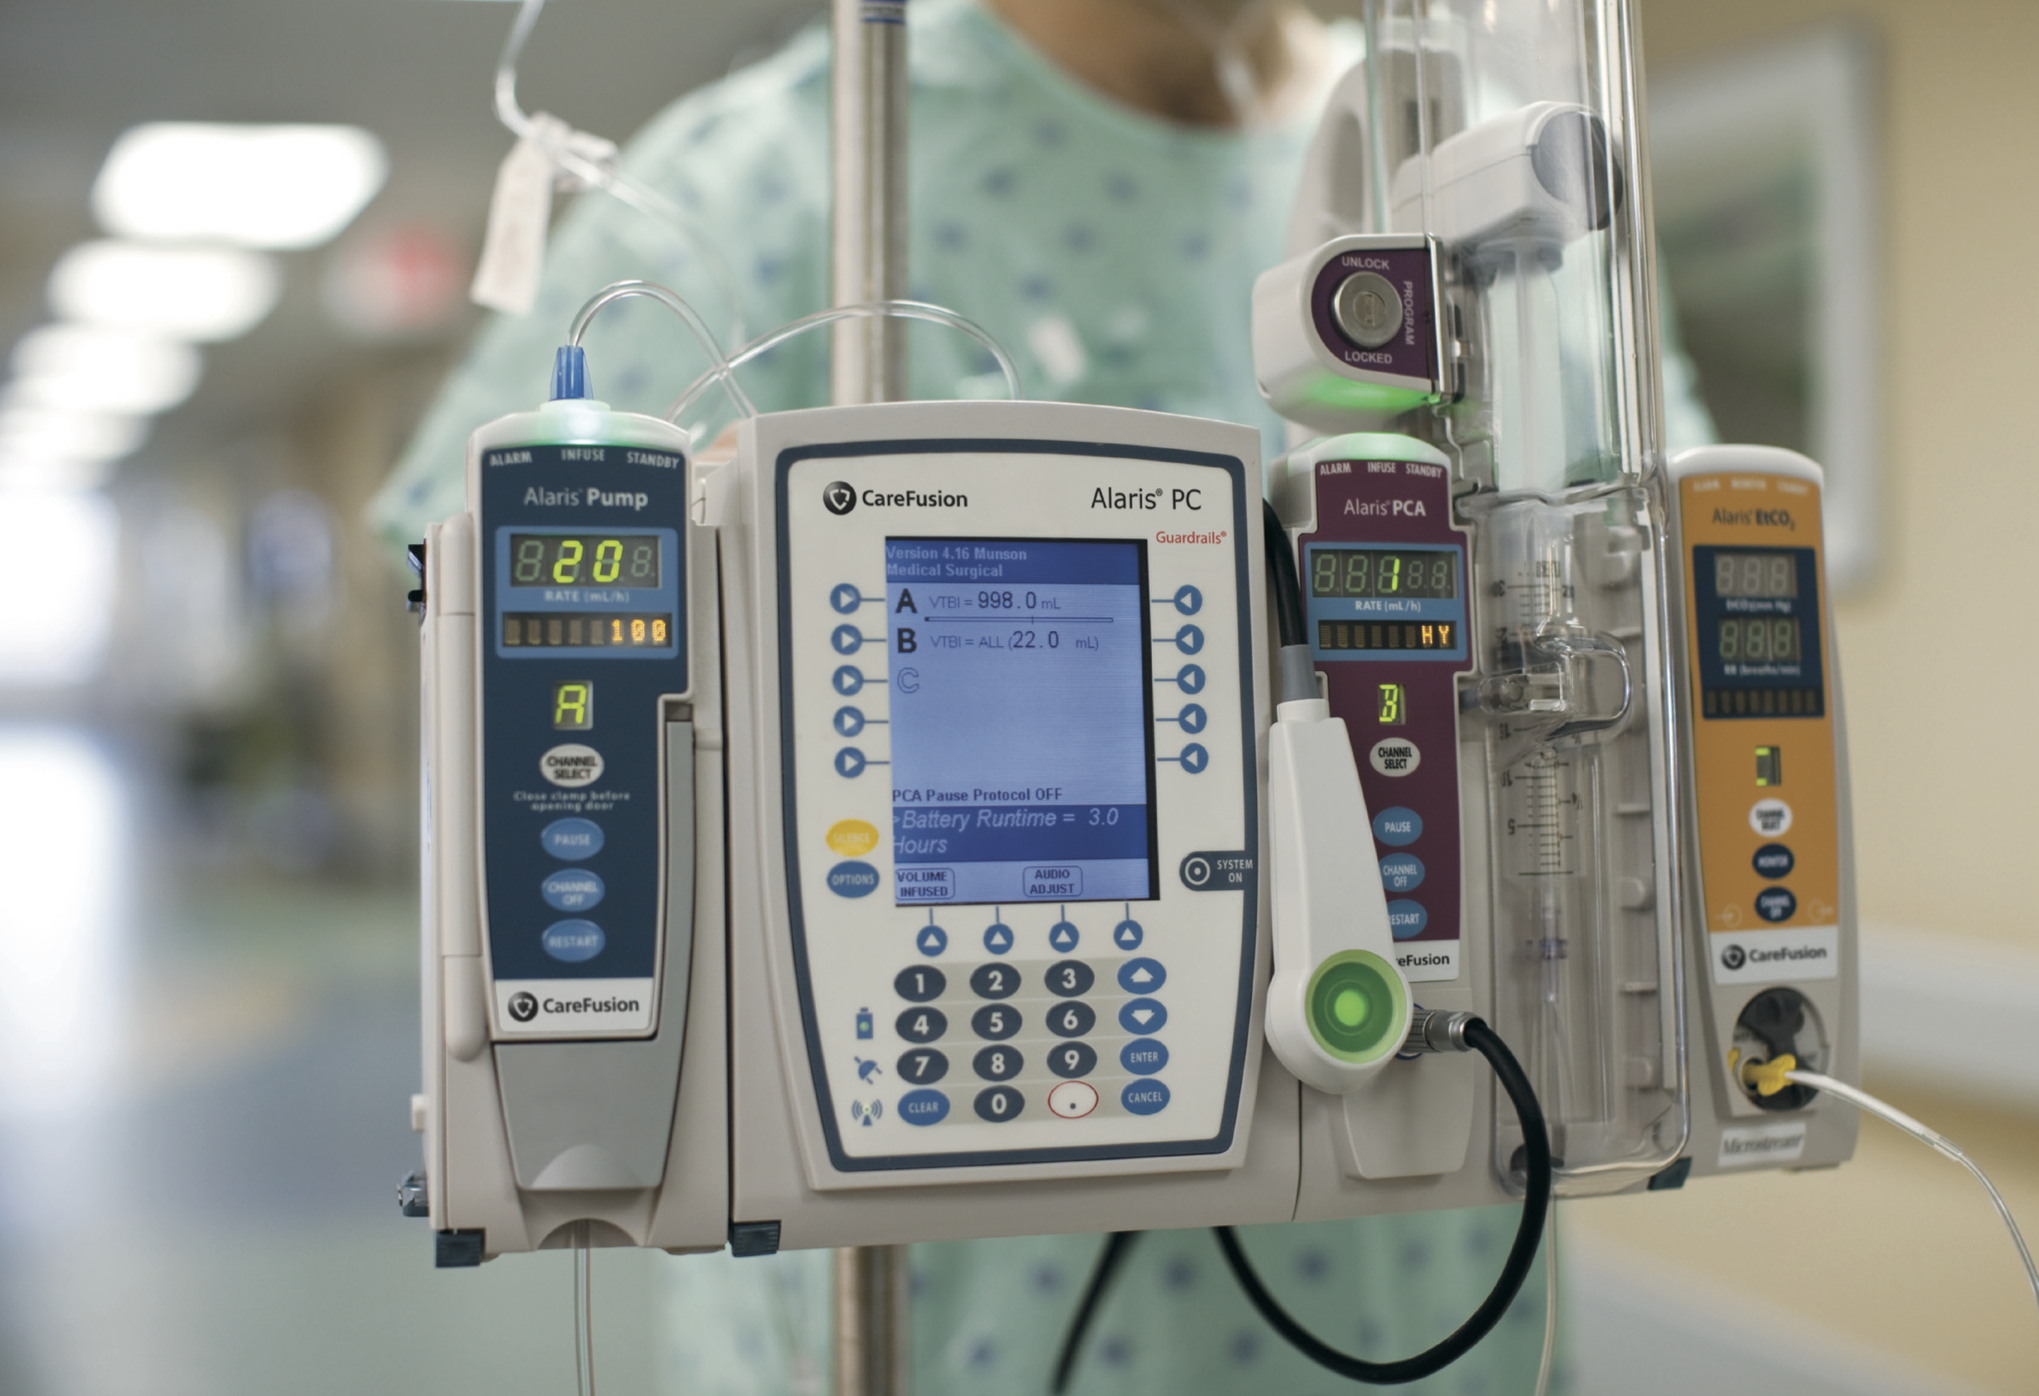 a widely used infusion pump can be remotely hijacked, say researchers | techcrunch